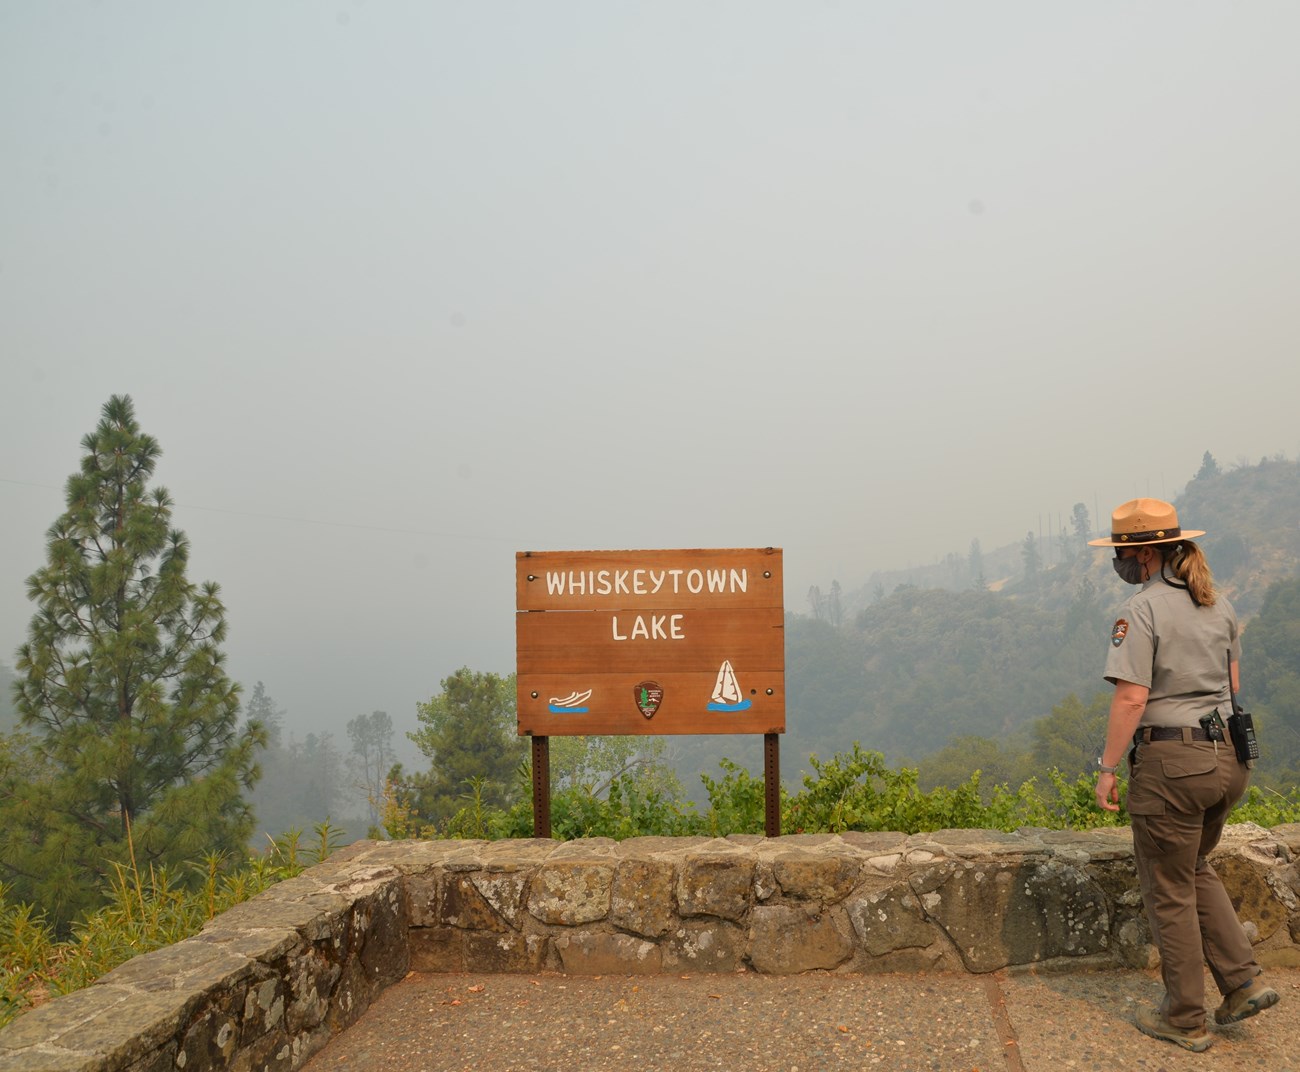 A female park ranger in flat hat, green pants, and grey shirt looks out over very smoky skies and low visibility. She should be able to see Whiskeytown Lake from her vantage point, but she can't because of the smoke.